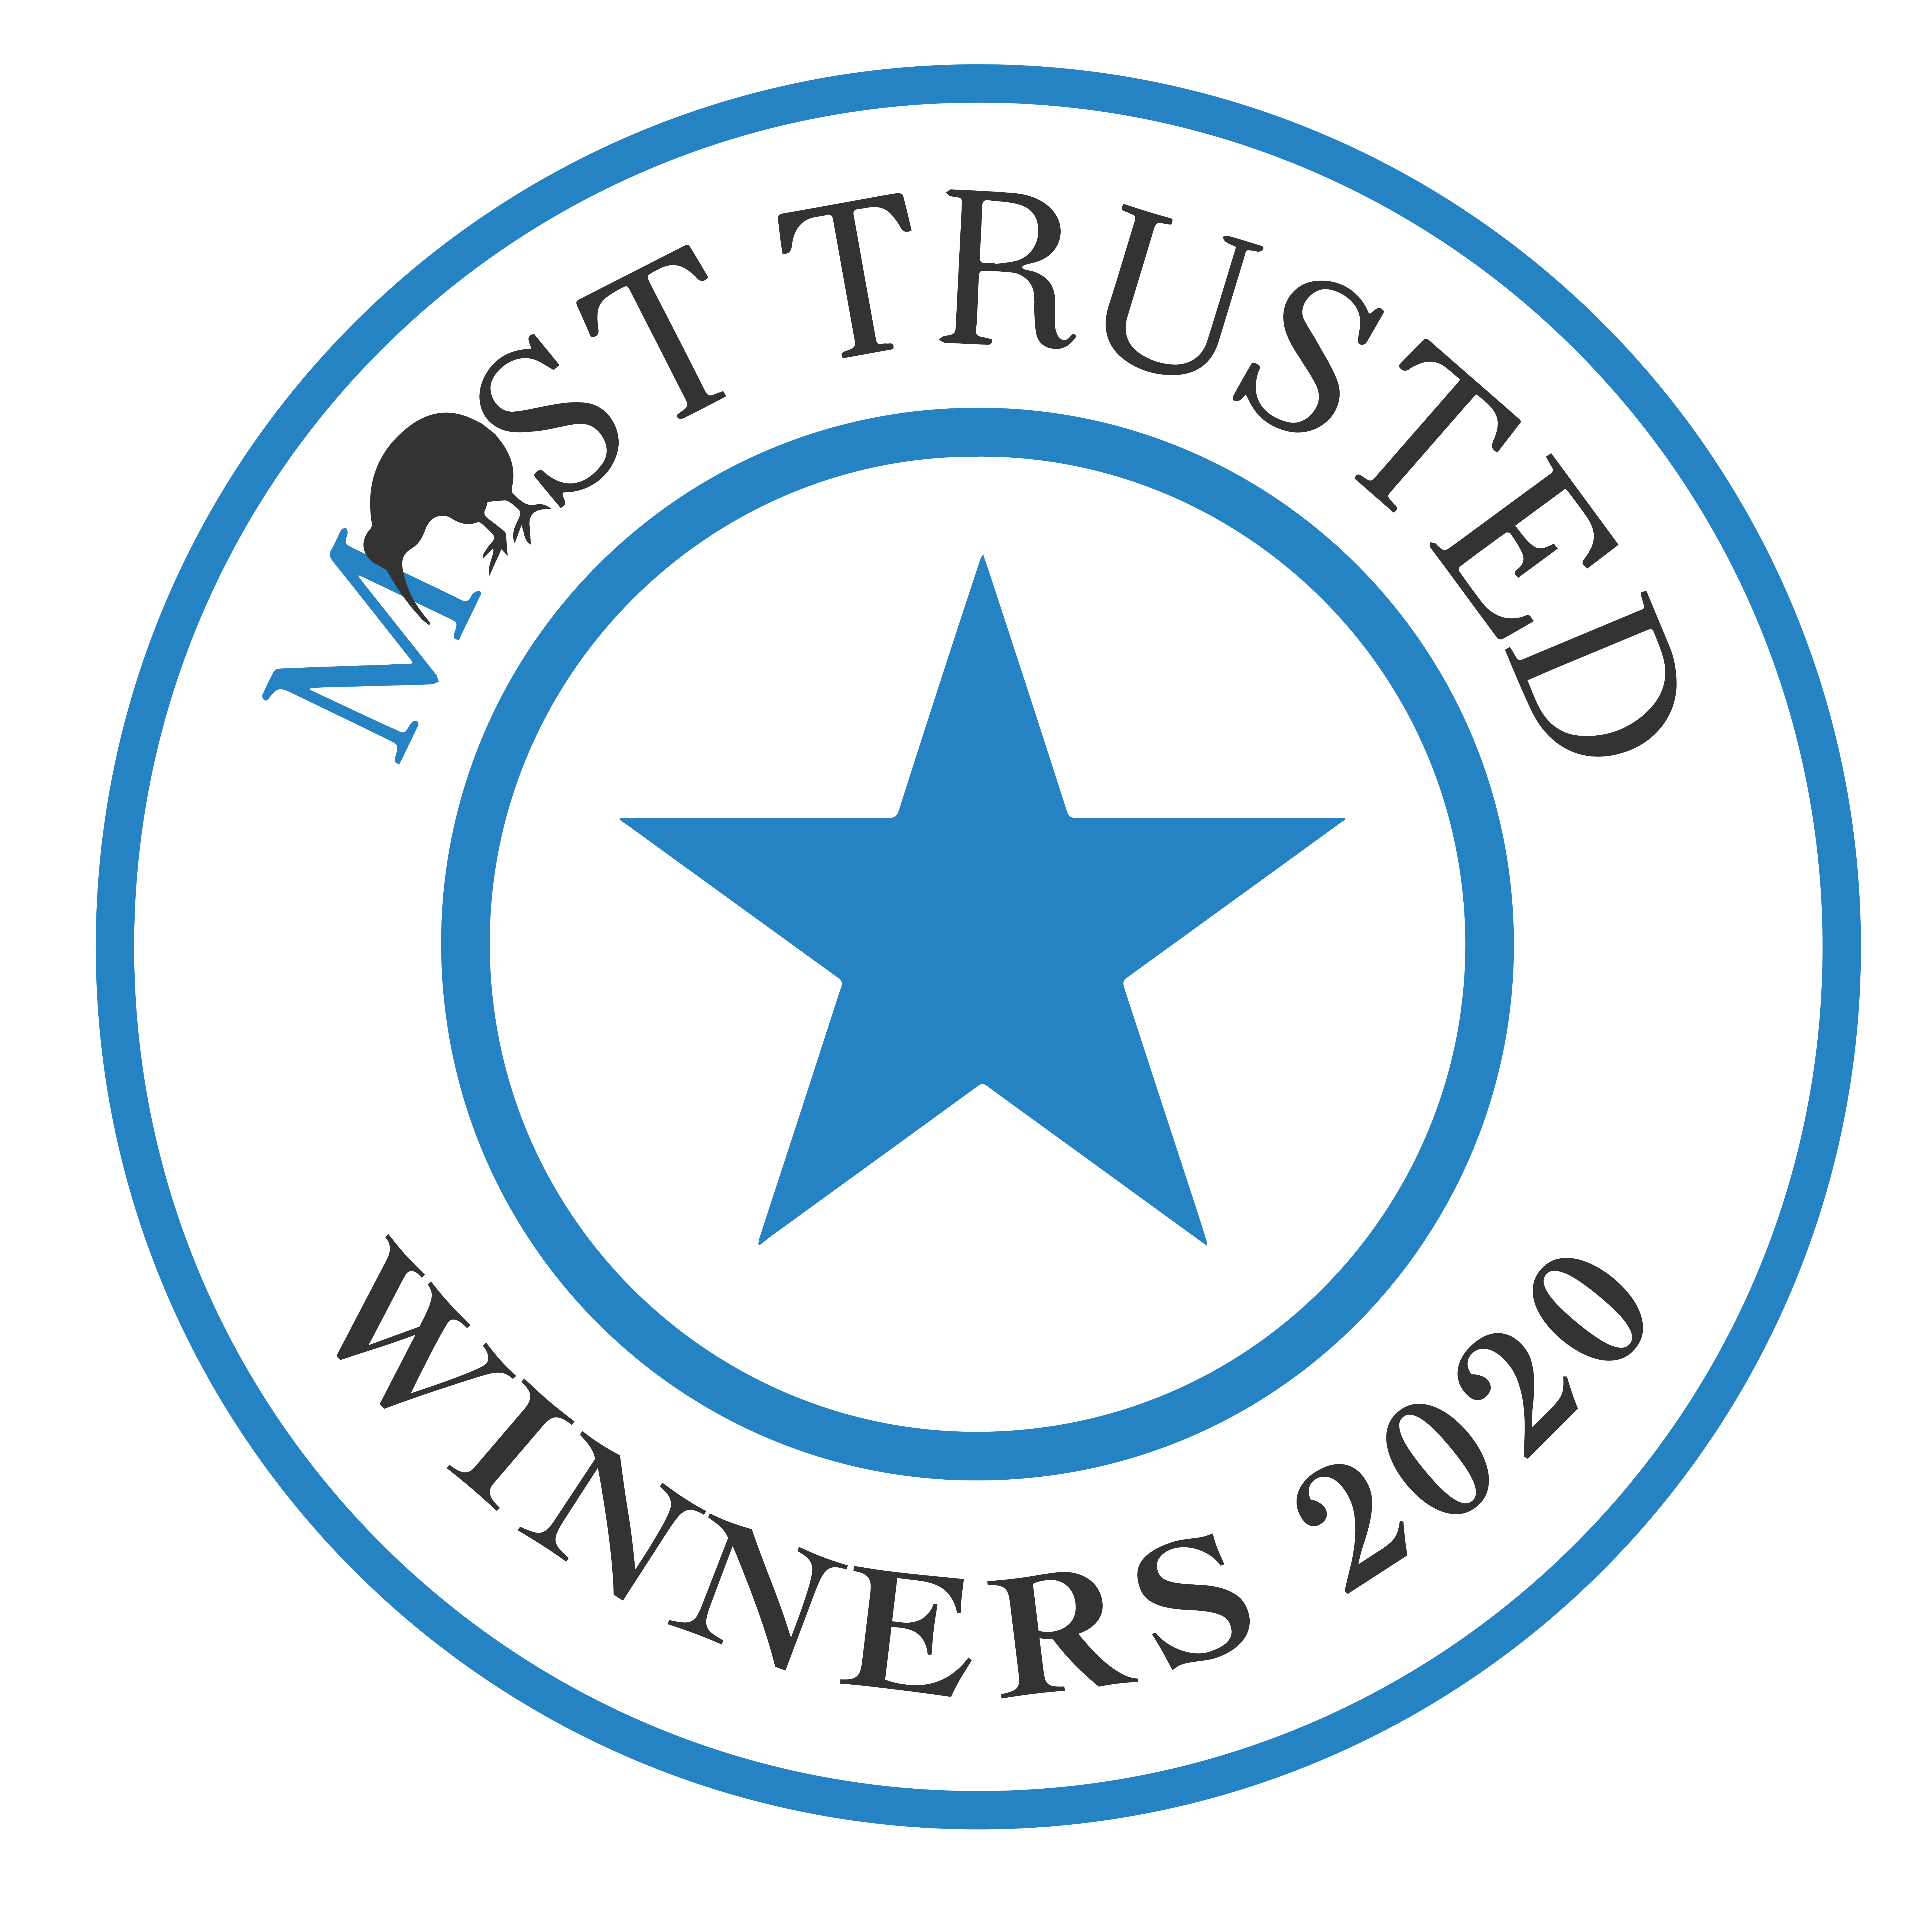 Most trusted winner 2018